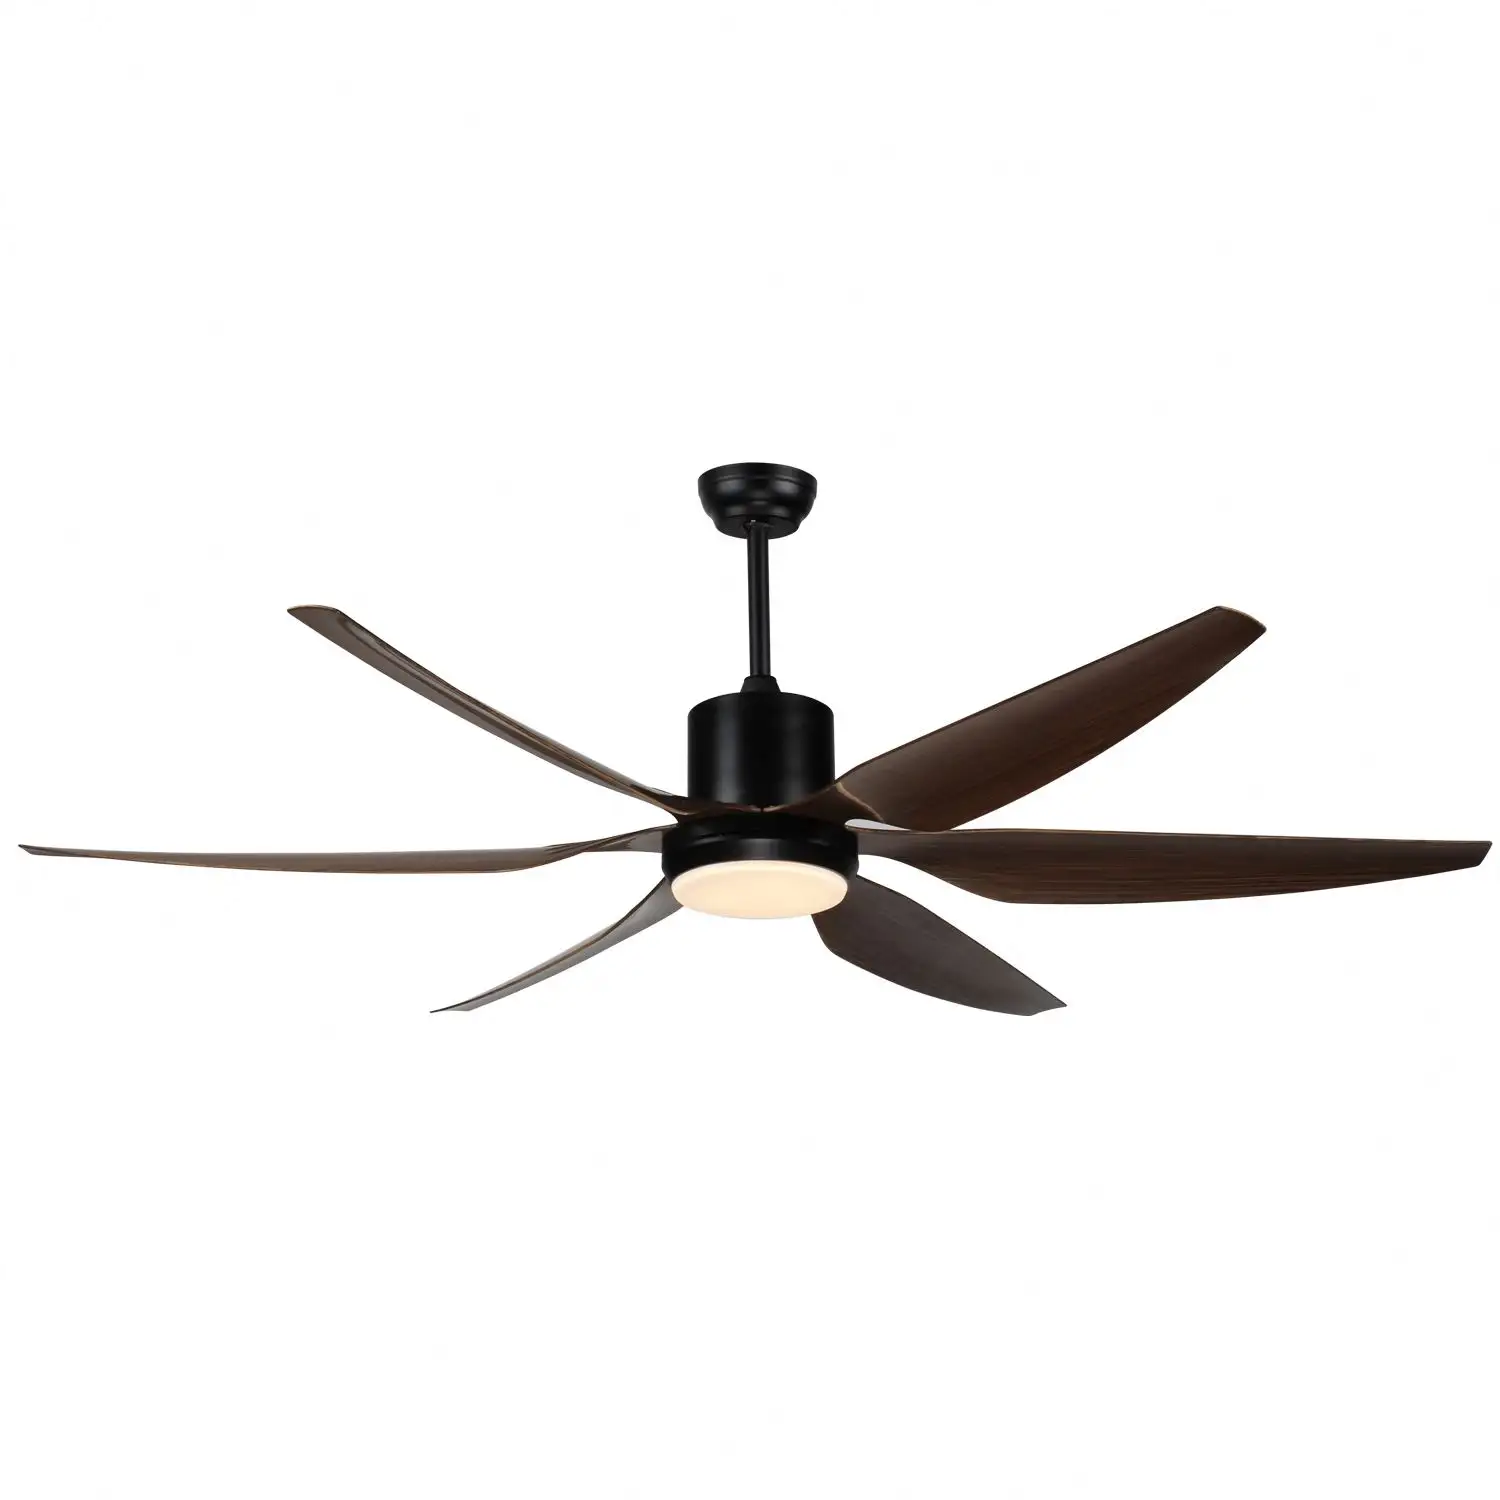 Modern Design Luxury Remote Control 6 Blades ABS Low Noise Ceiling Fan